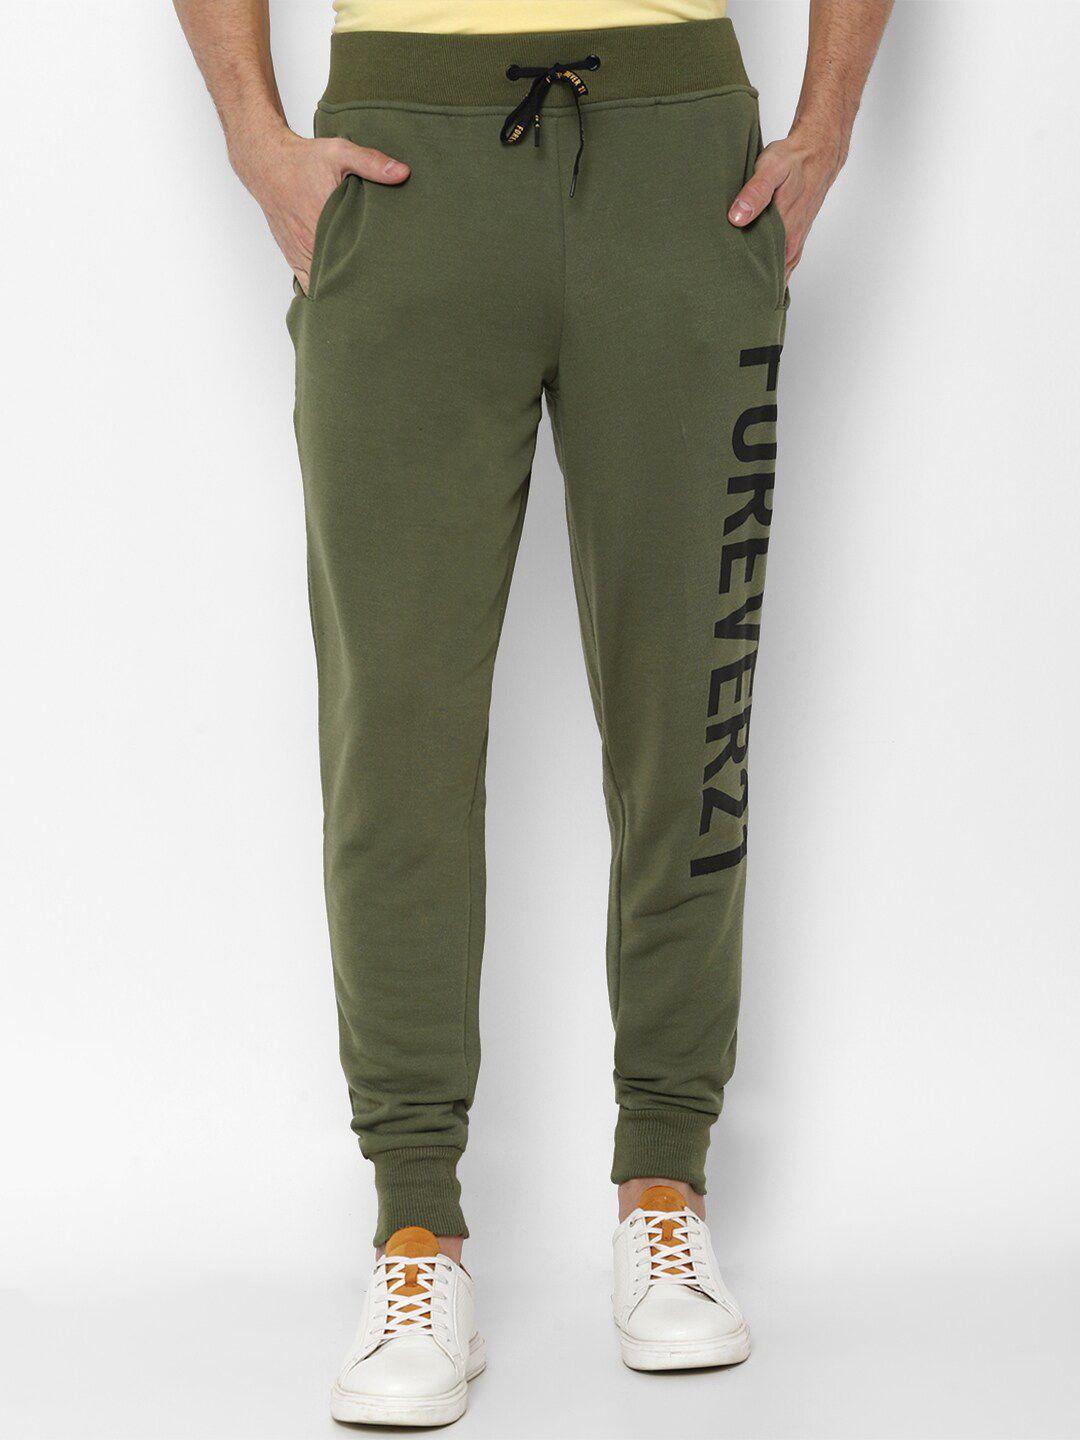 forever 21 olive green solid active sport joggers track pant